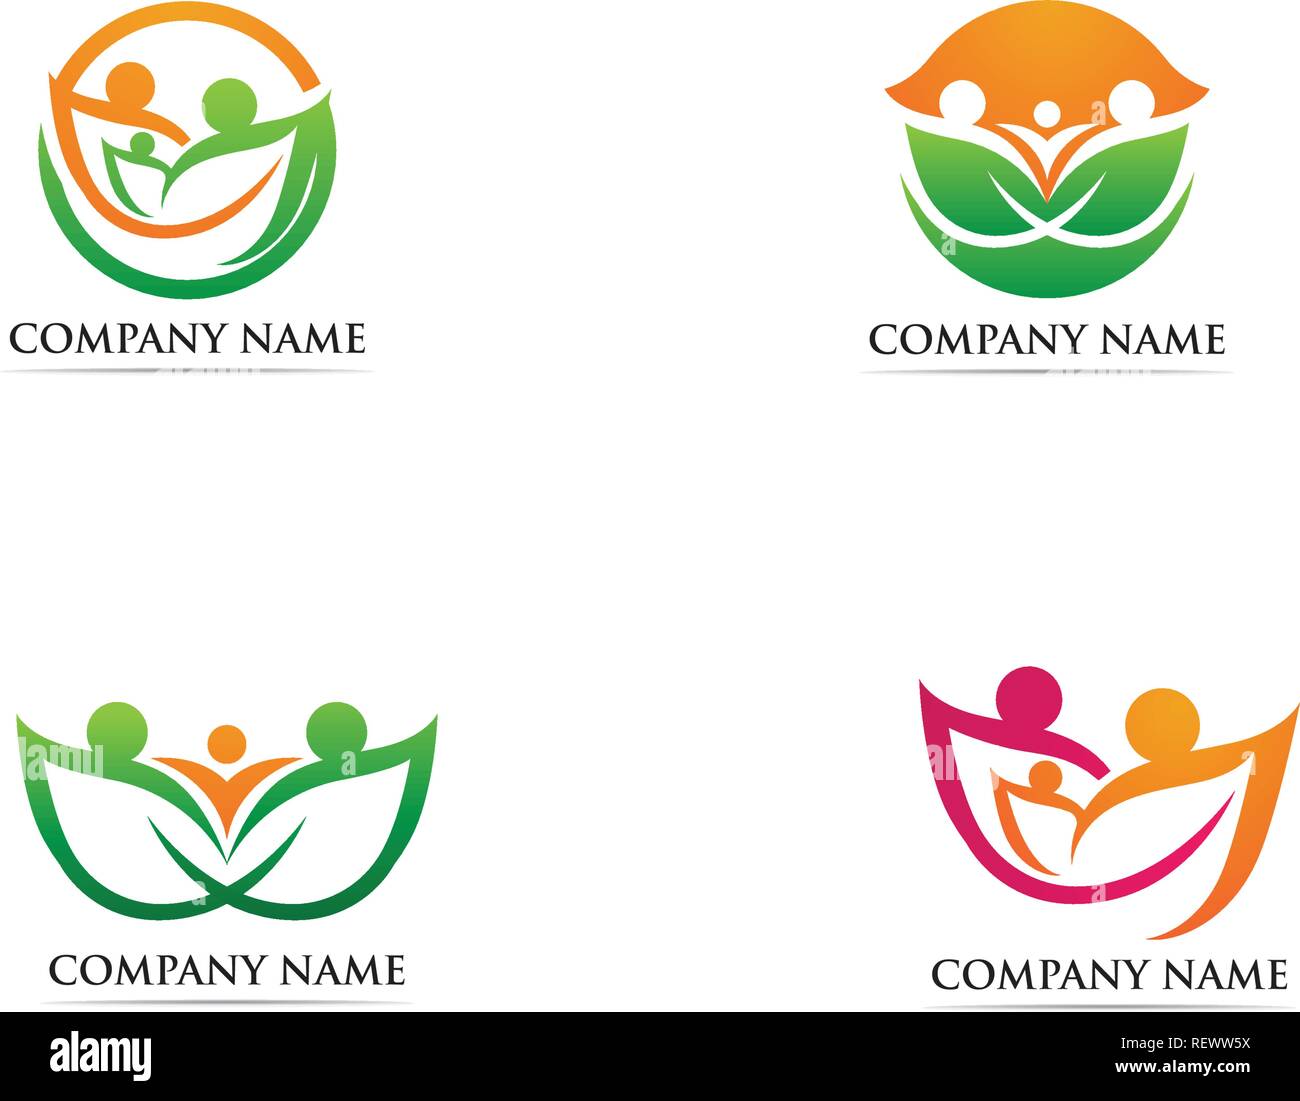 Family care logo and symbol vector Stock Vector